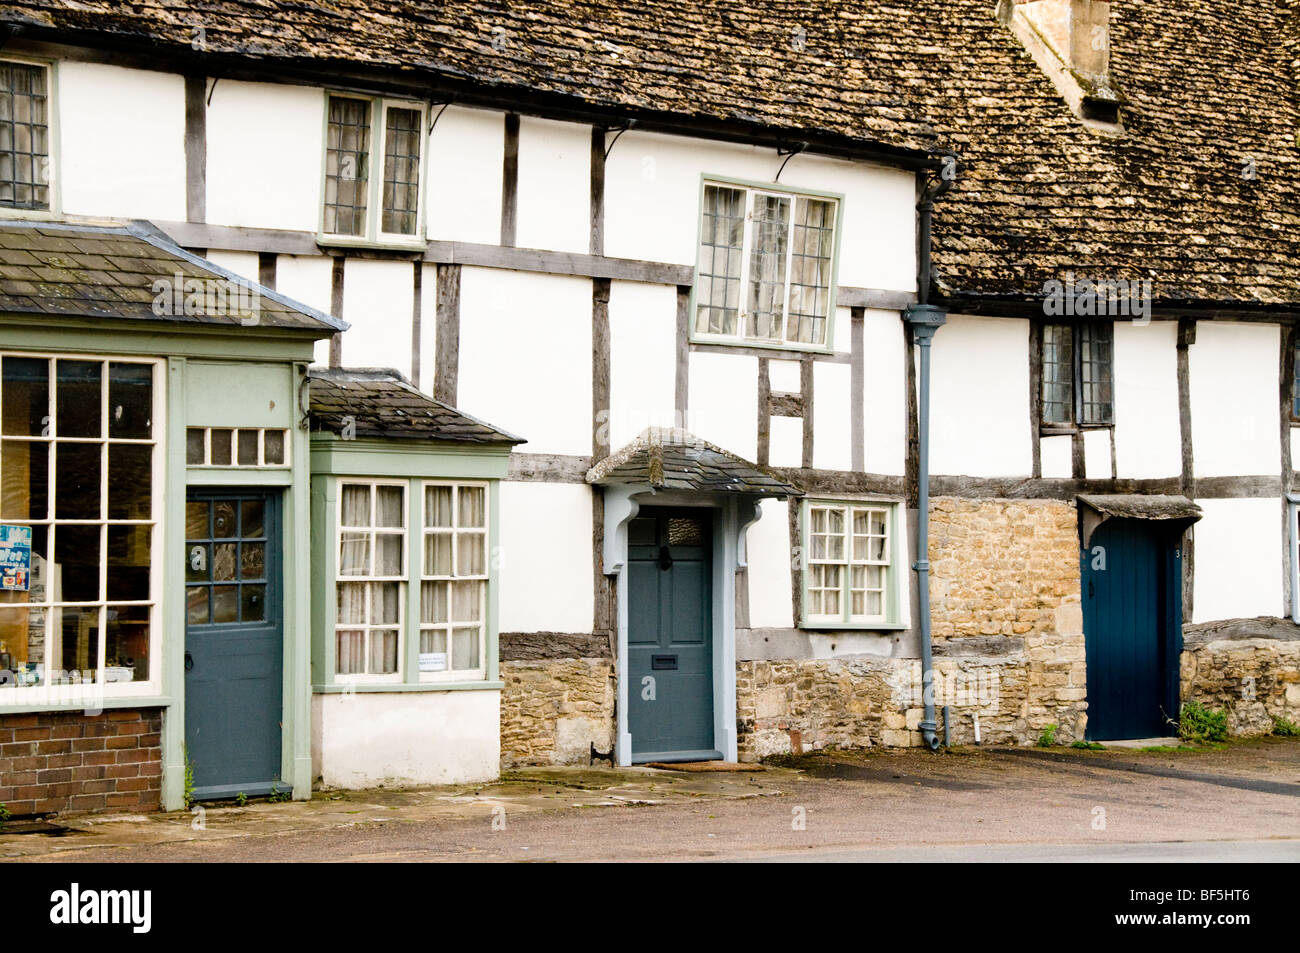 Half timber frame house, Lacock, Wiltshire, Cotswolds, UK Stock Photo